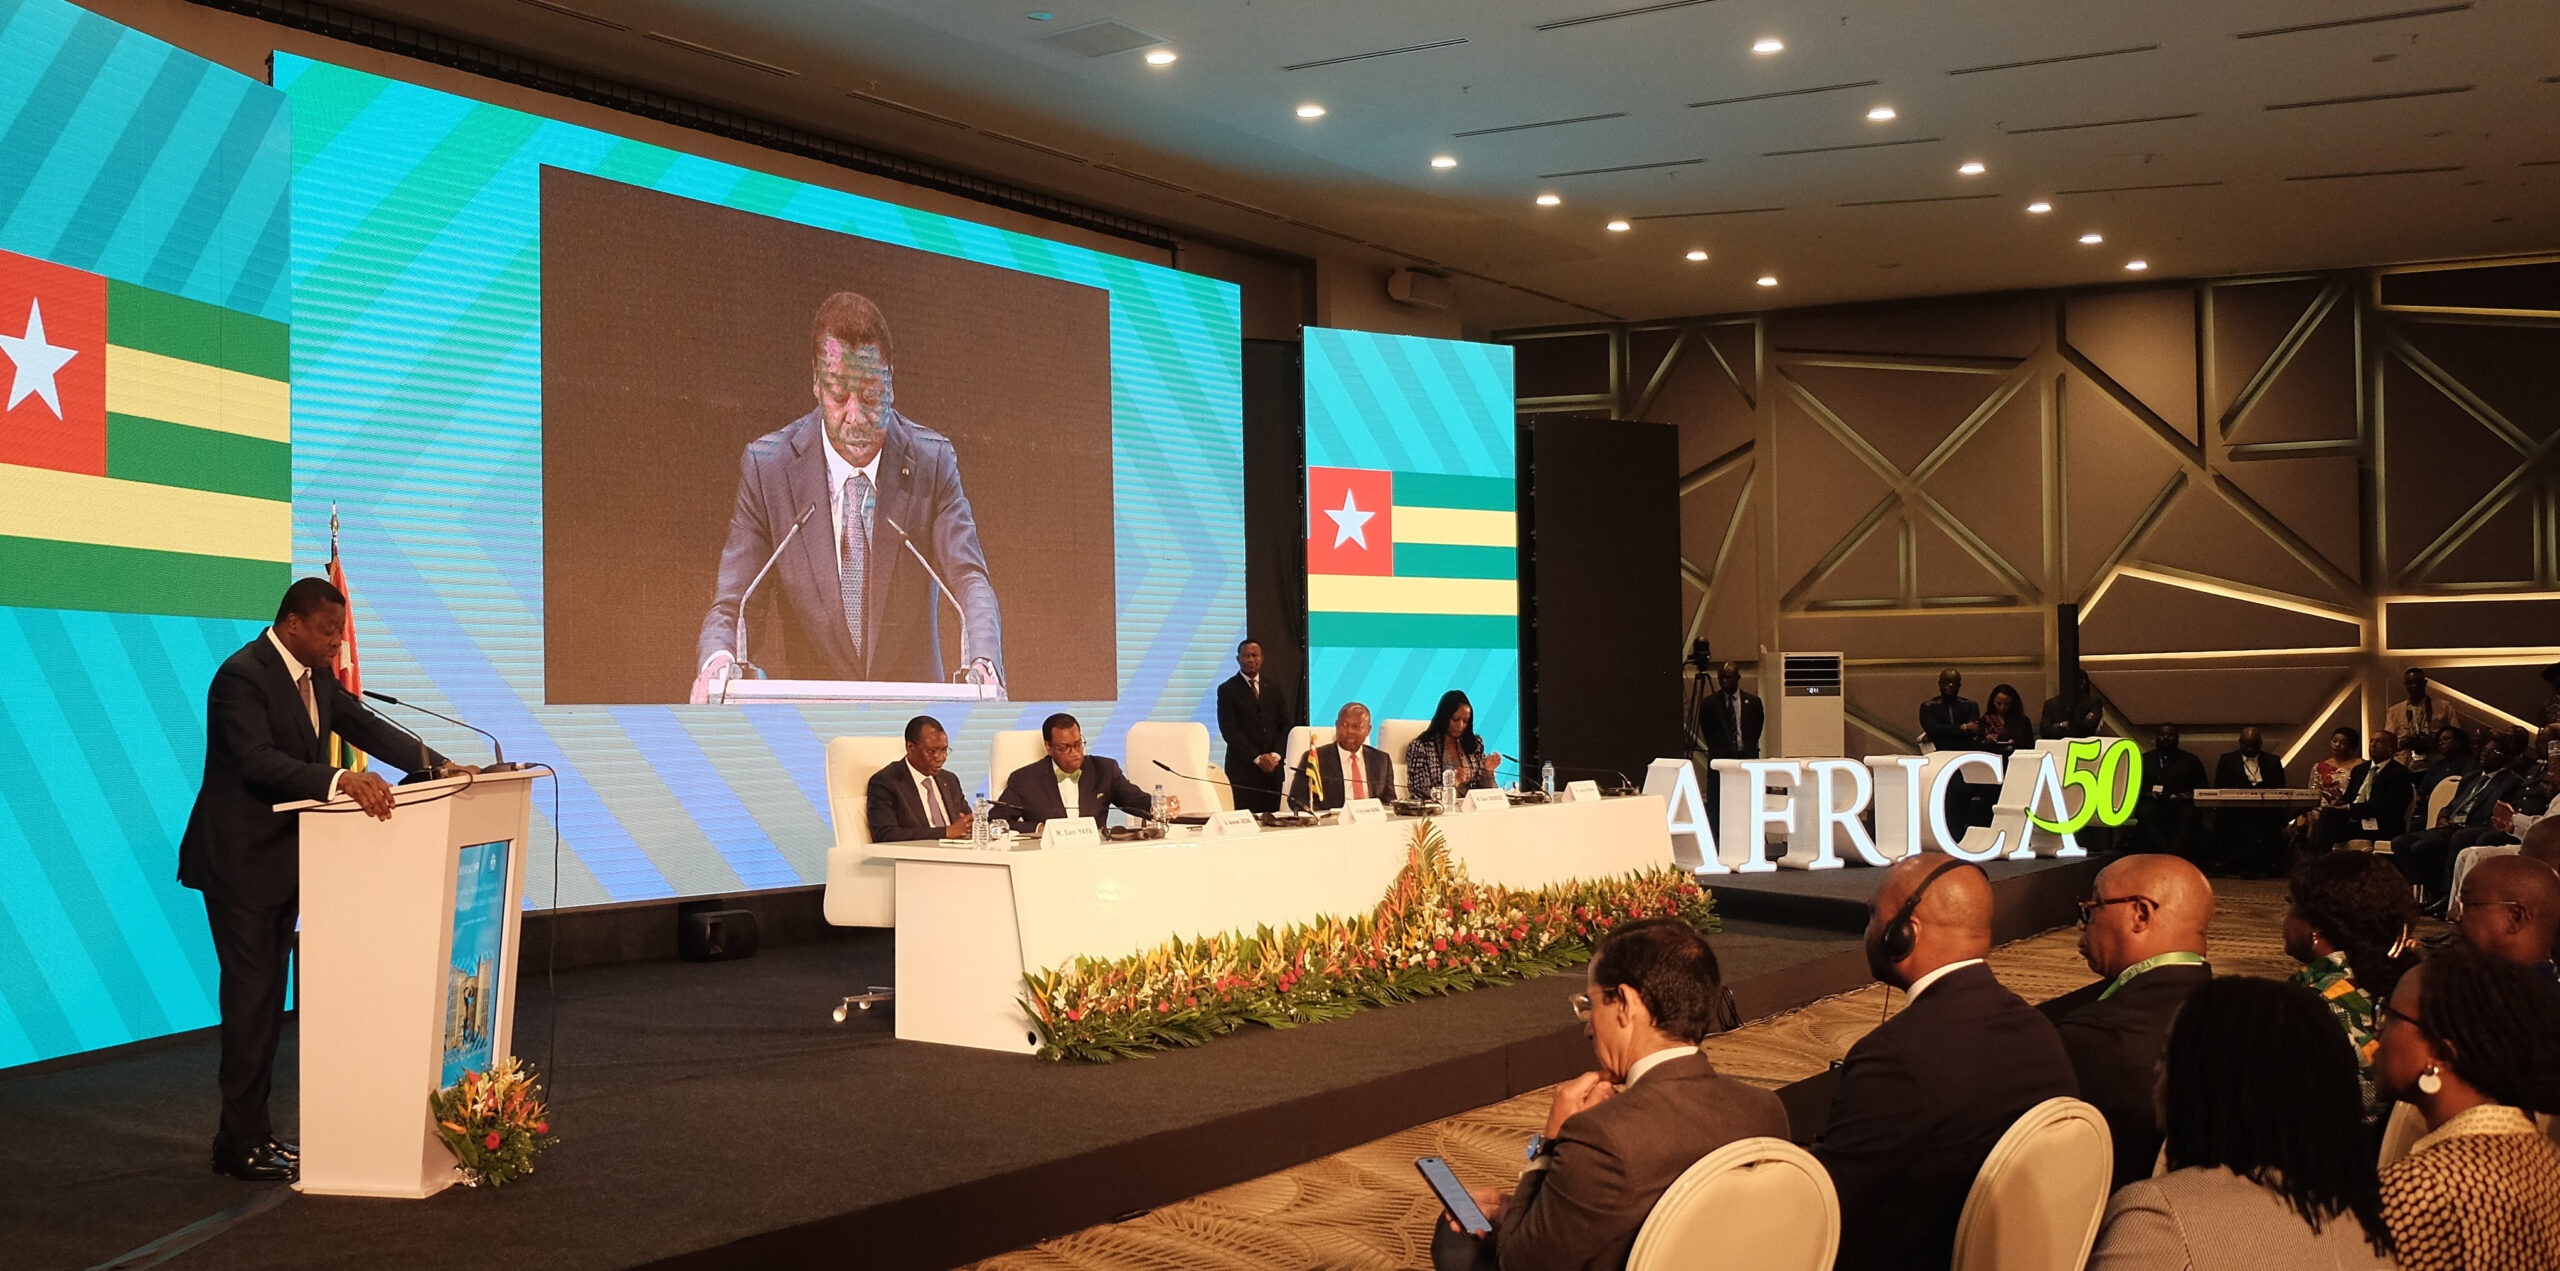 Infra for Africa Forum: Landmark Asset Recycling agreement between Togo and Africa50 signed